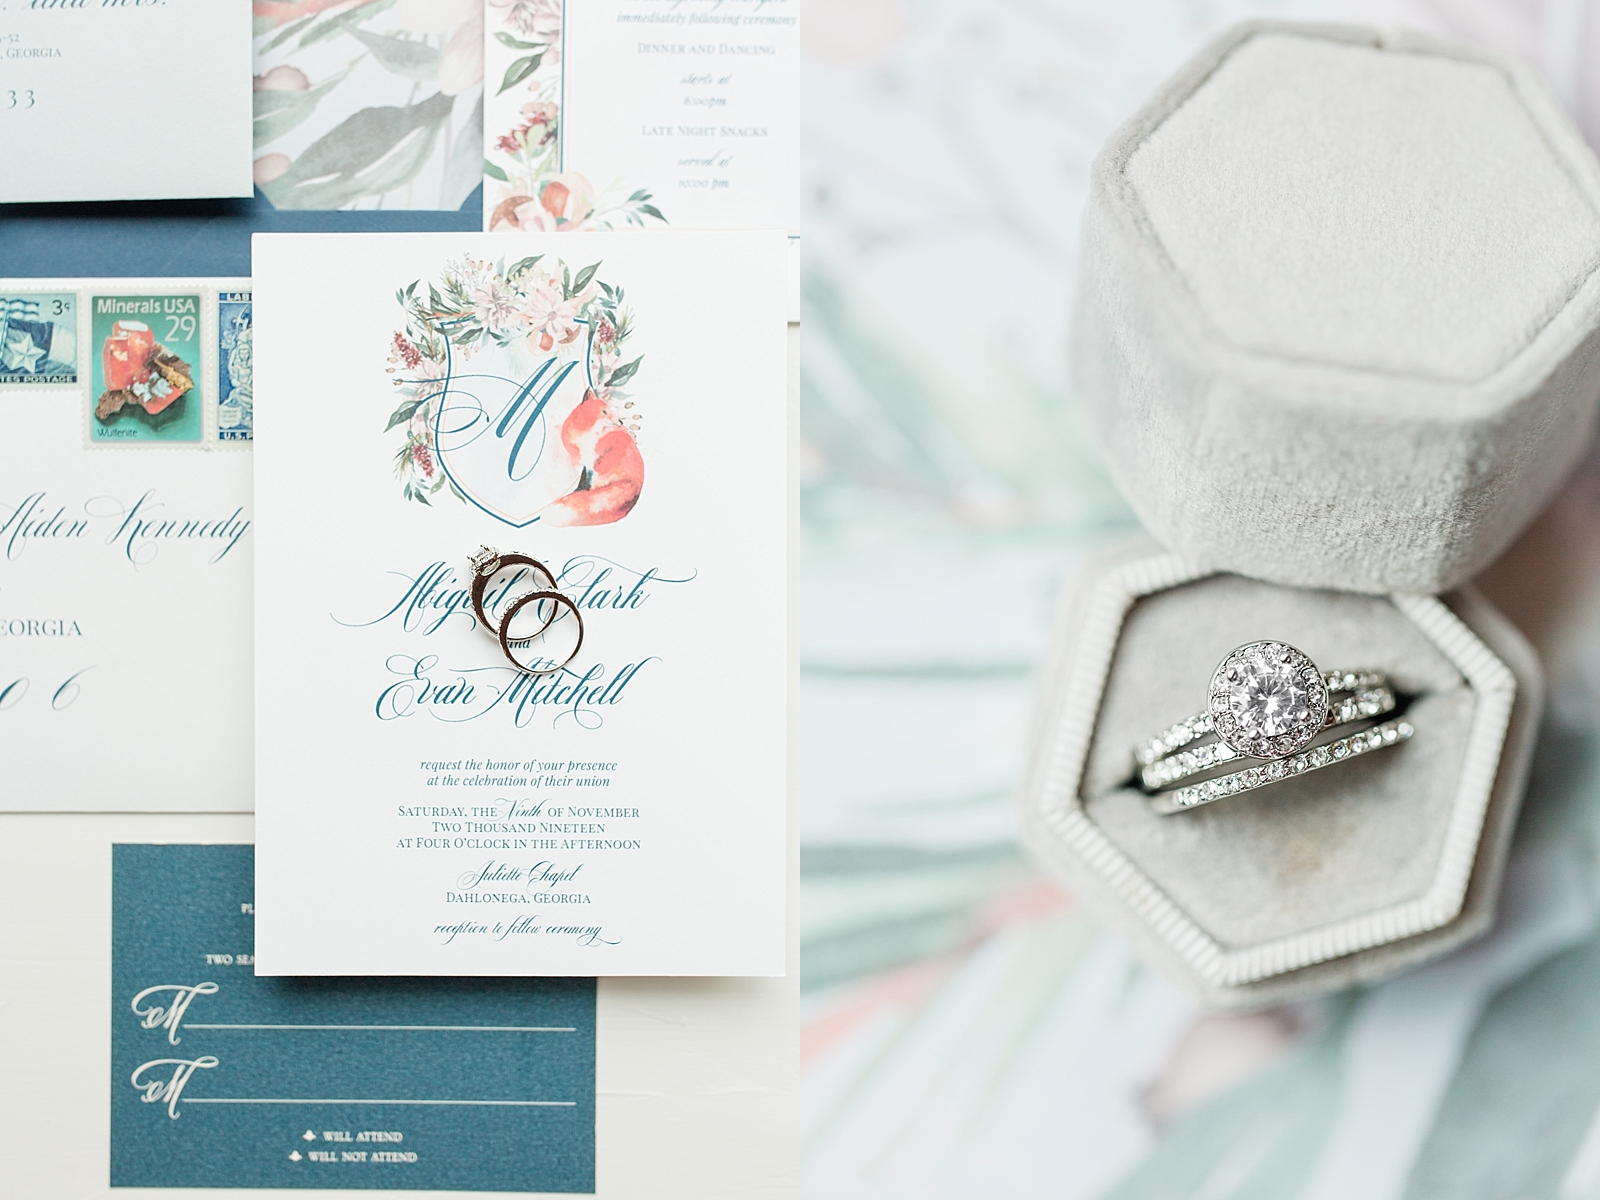 Juliette Chapel Wedding Invitation Suite and Detail of Ring in grey ring box Photos